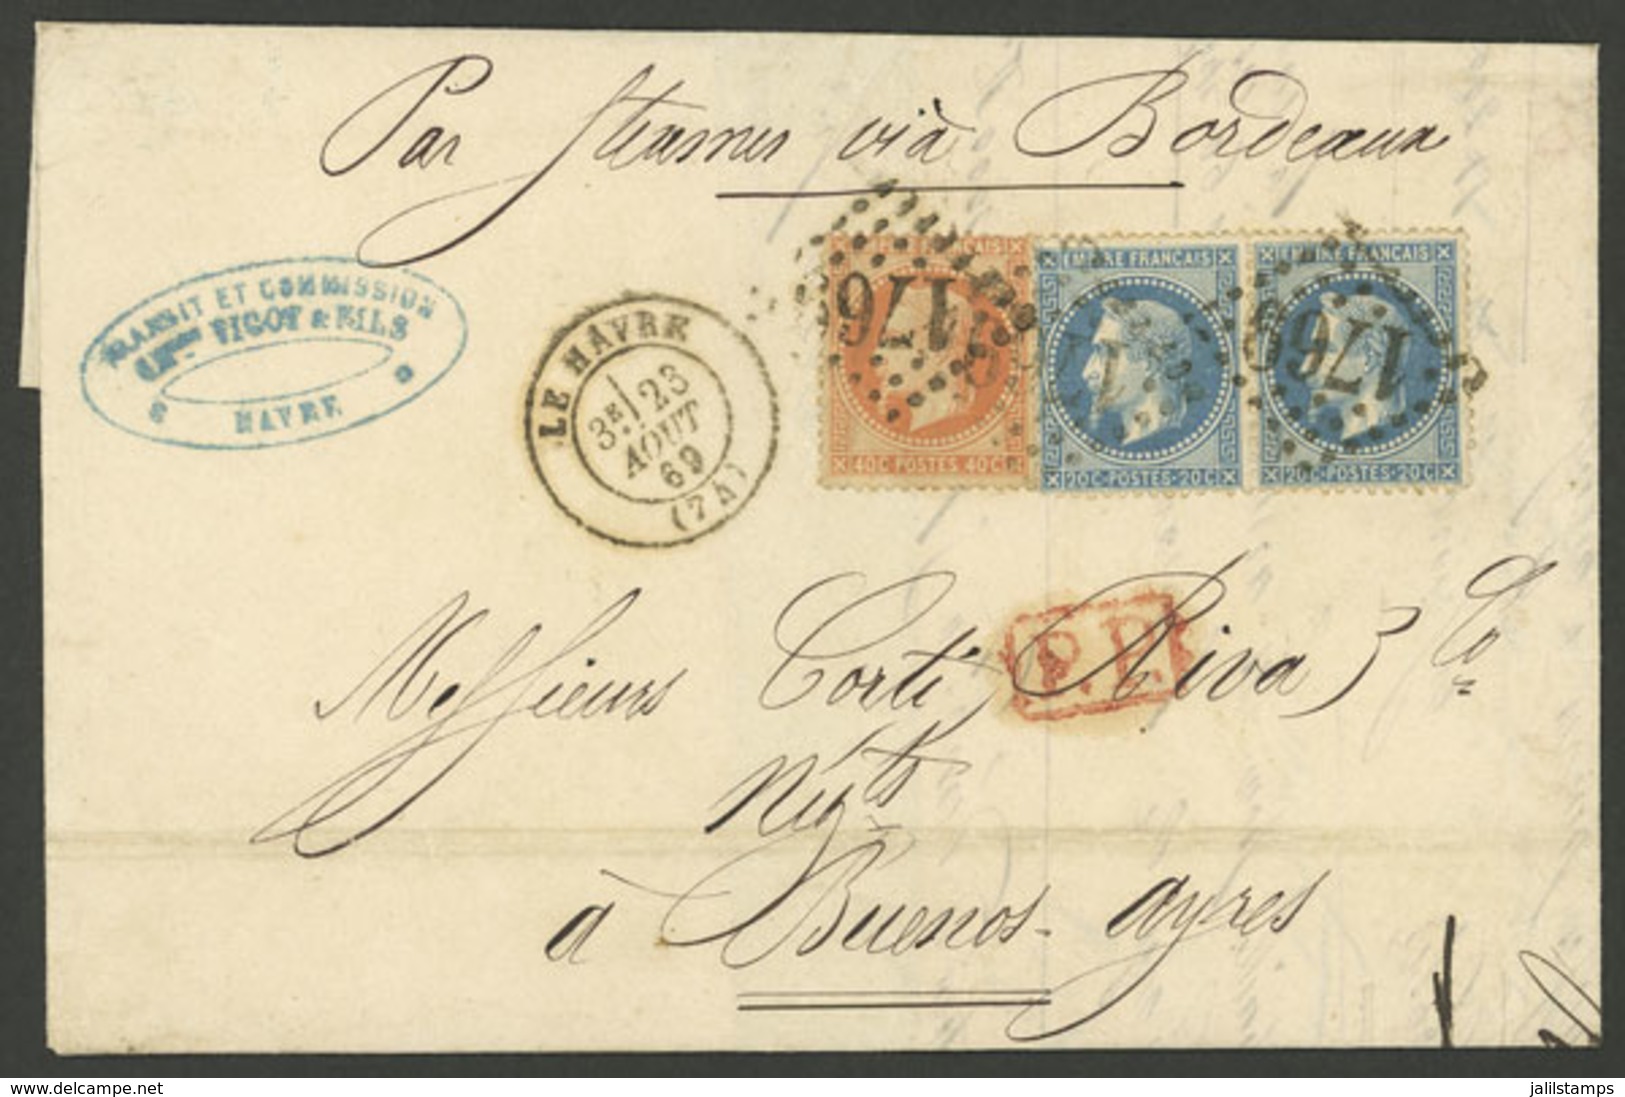 FRANCE: 23/AU/1869 Le Havre - Buenos Aires "by Steamer Via Bordeaux", Folded Cover Franked With 80c., With Numeral Cance - 1863-1870 Napoleone III Con Gli Allori